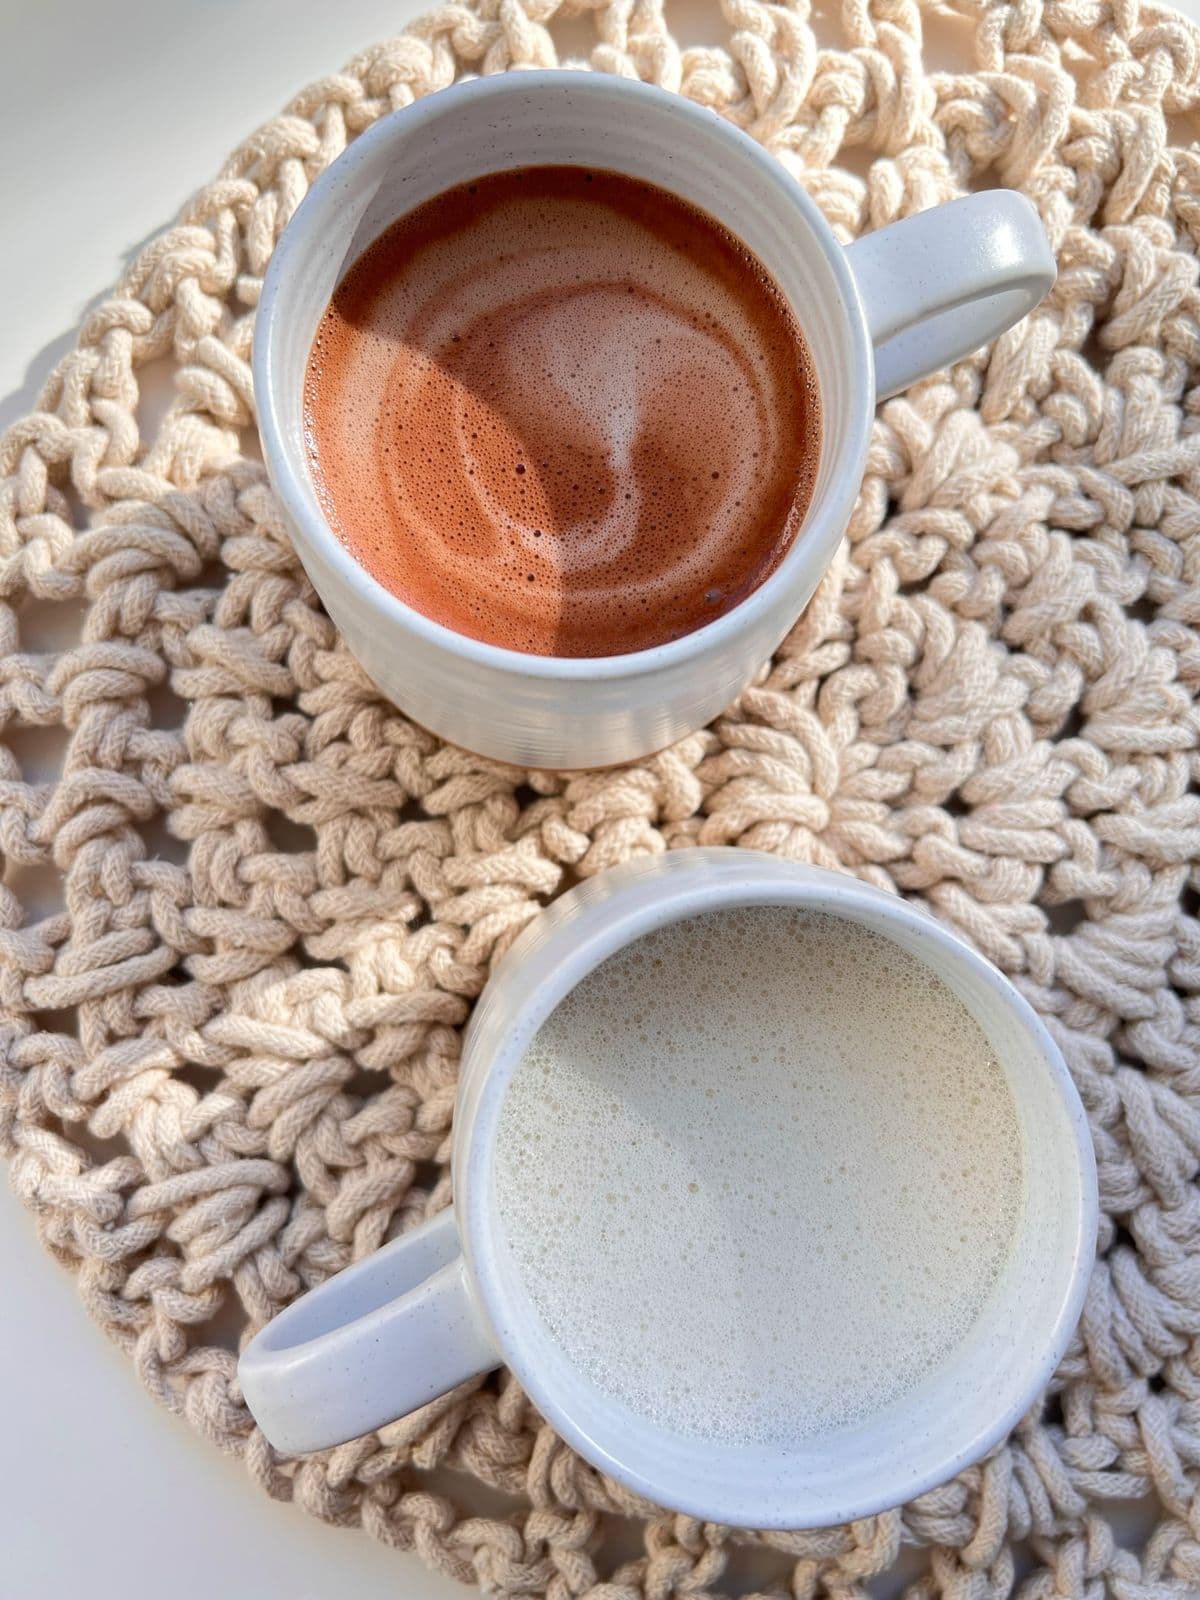 Two ceramic mugs of hot malted oat drinks, sitting on top of an oatmeal coloured placemat, one mug contains Hot Malted Cacao, and one mug contains Hot Malted Oat Milk.